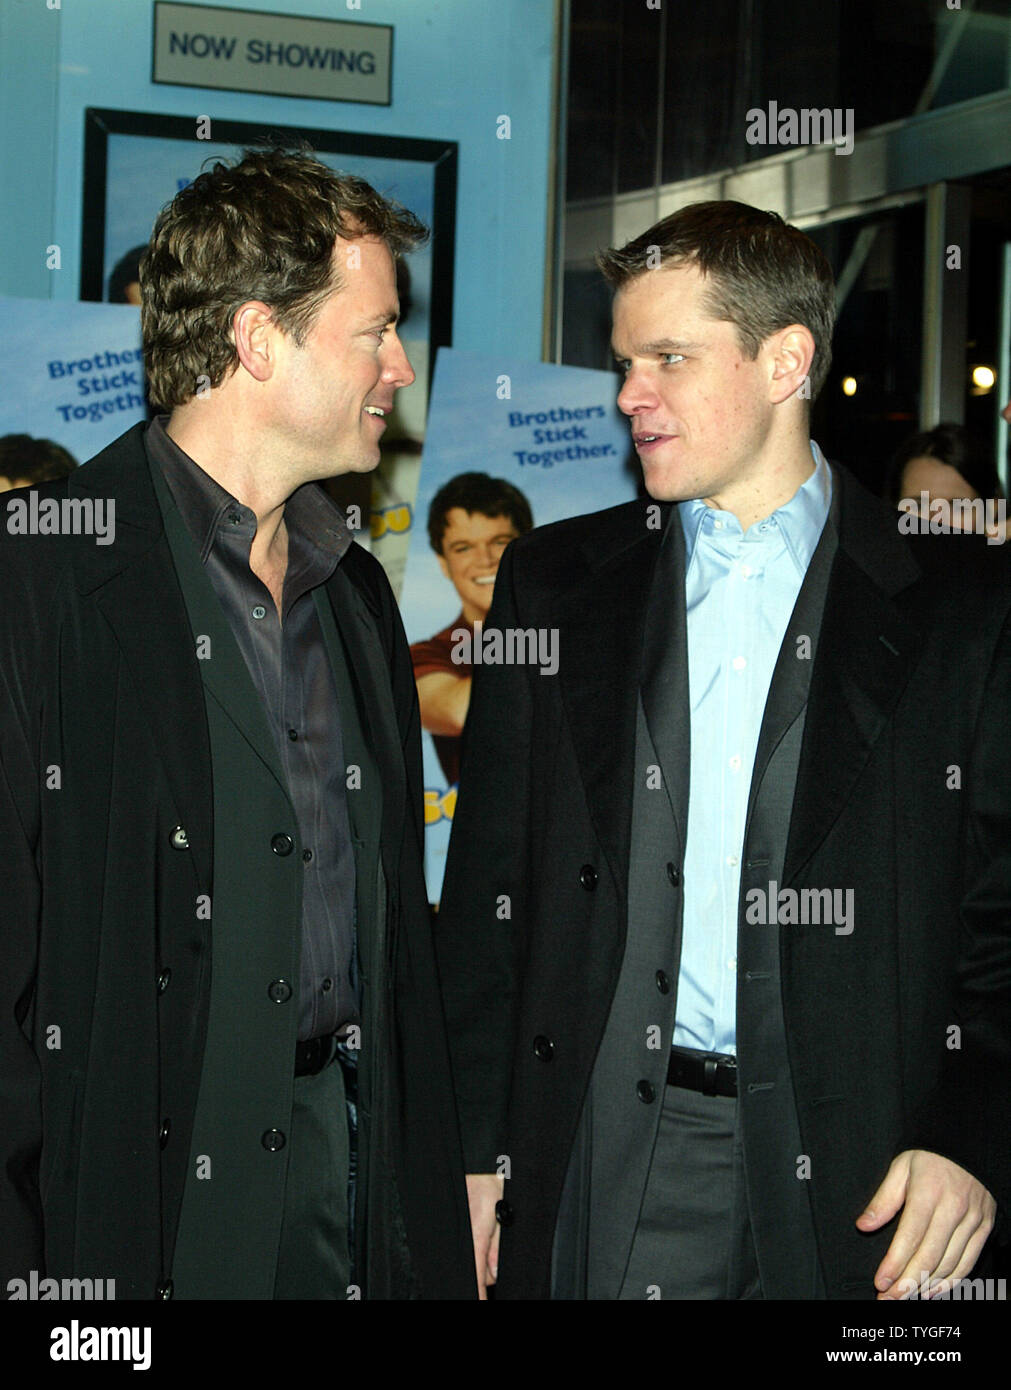 Greg Kinnear (left) and Matt Damon pose for pictures at the premiere of 'Stuck on You' at the Clearview Chelsea West Theater in New York on December 8, 2003.   (UPI Photo/Laura Cavanaugh) Stock Photo